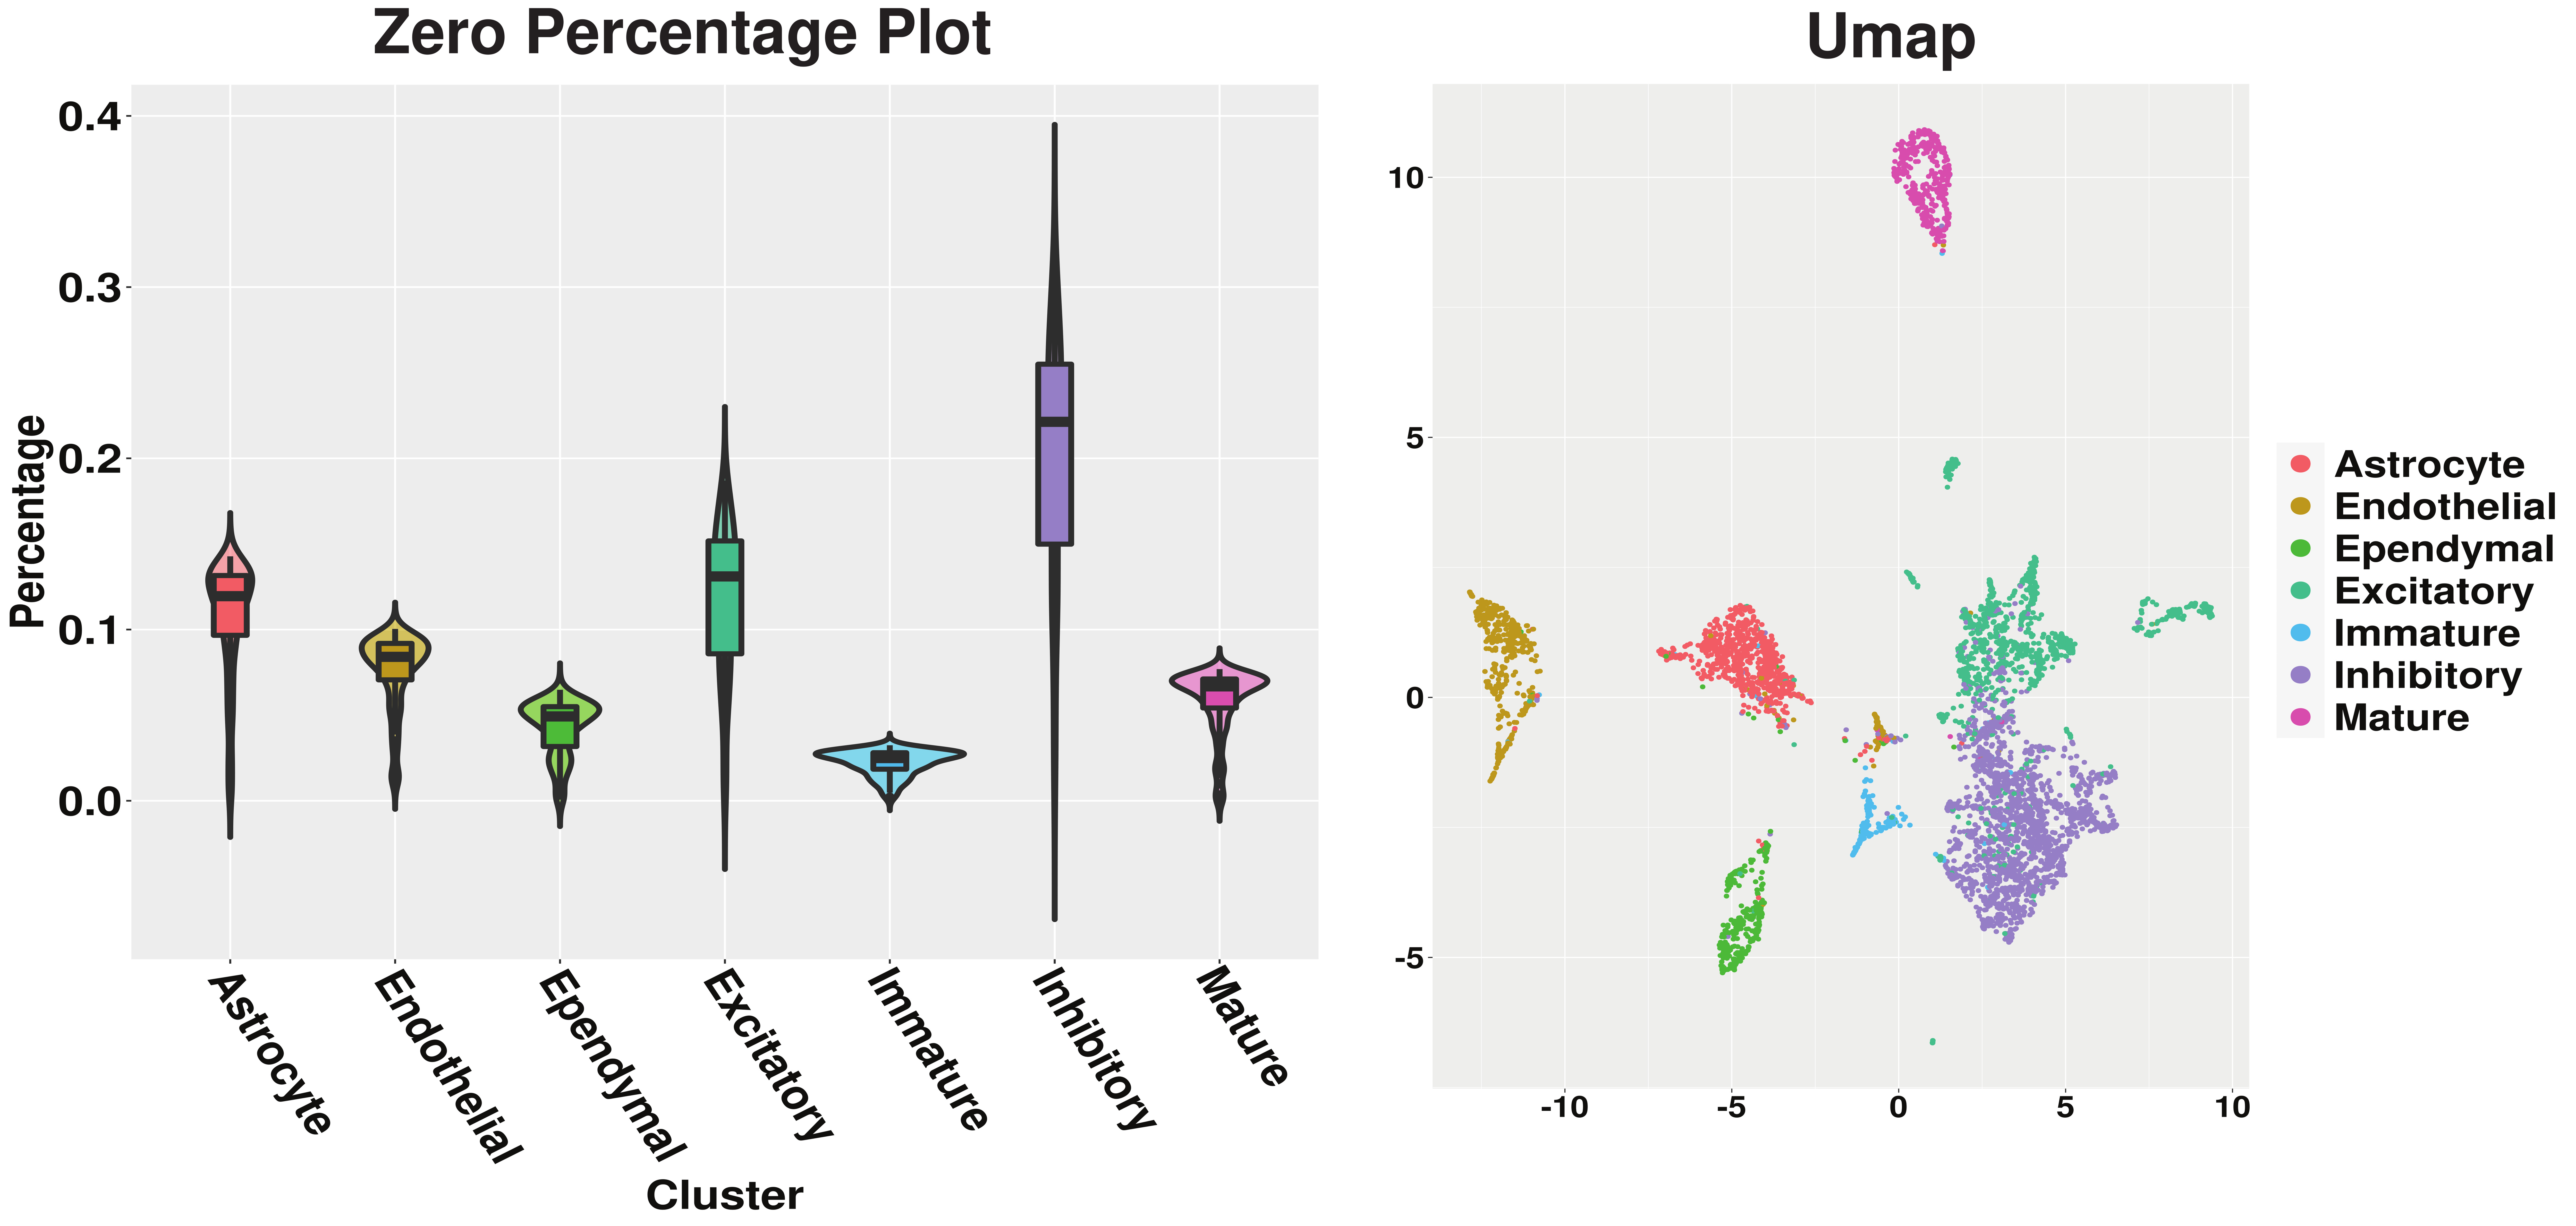 Left panel shows the violin plot of percentage of zero reads among the genes for each cluster w.r.t. Merfish data and the right panel shows the Umap.